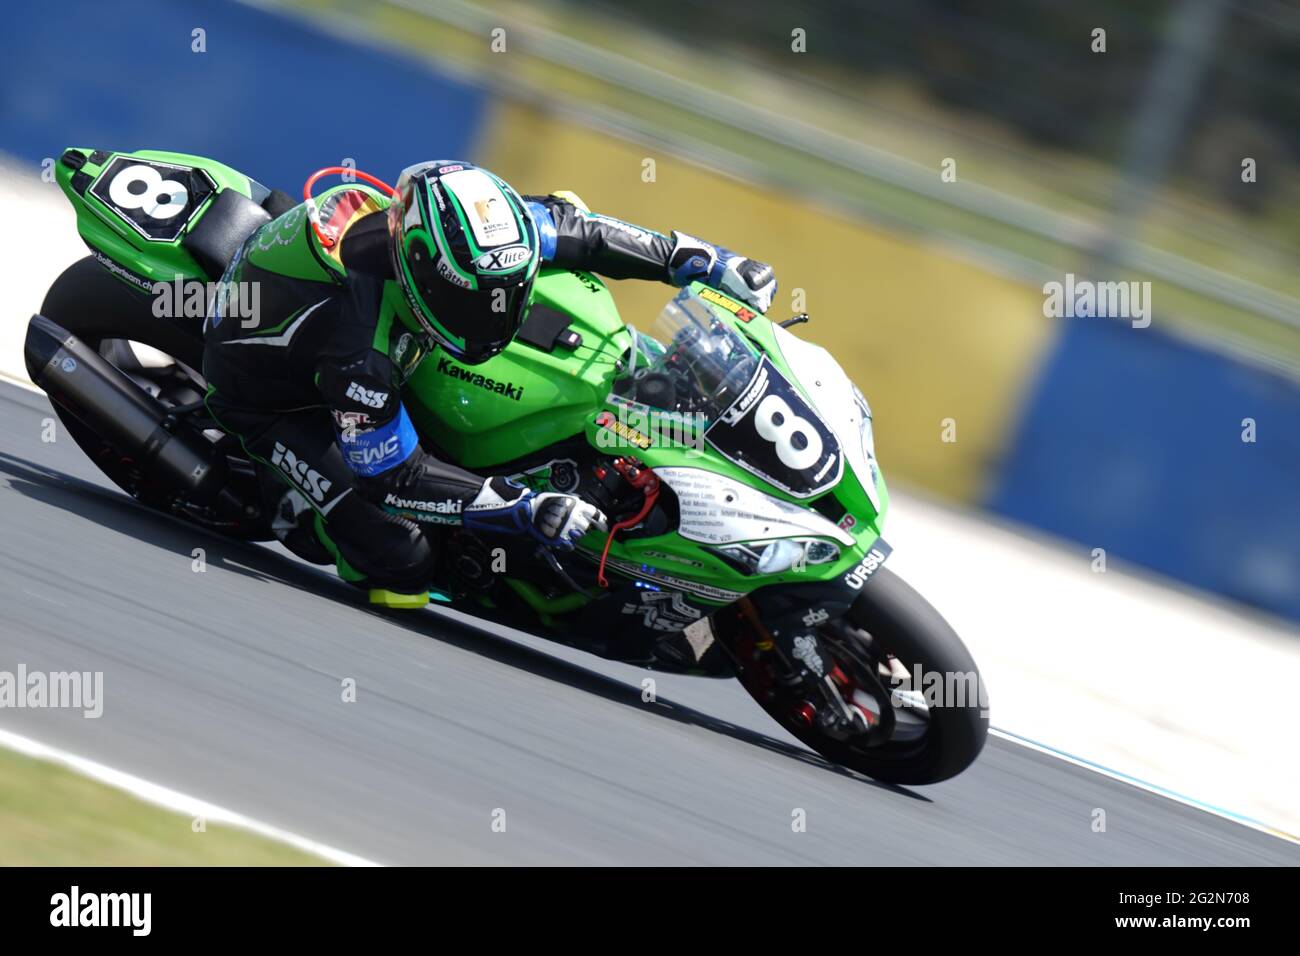 Le Mans, Sarthe, France. 12th June, 2021. Bolliger Team Switzerland #8  Kawasaki ZX 10R - #8 JAN BUHN (GER) in action during the race of 44th  edition of the 24 hours motorcycle